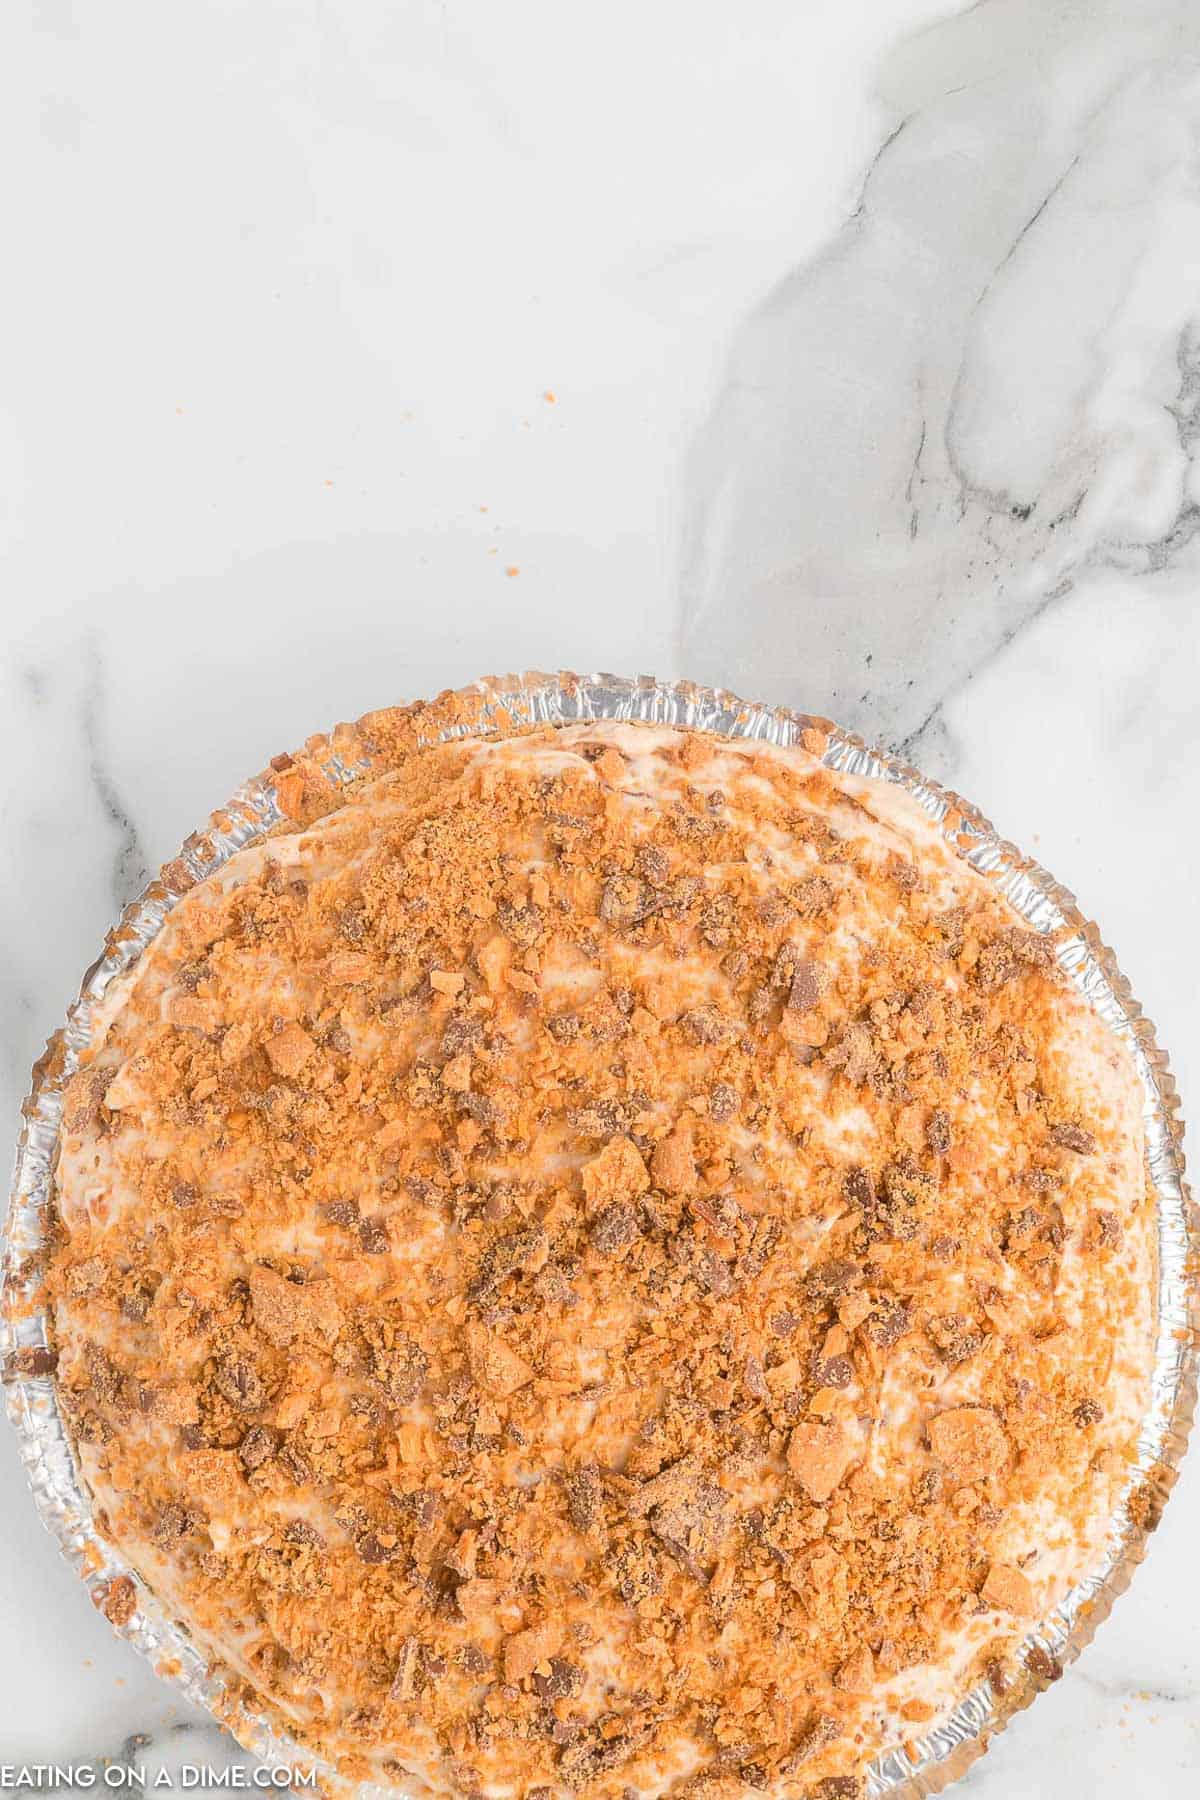 Spreading the peanut butter mixture into pie pan and topping with crushed butterfinger candy bars